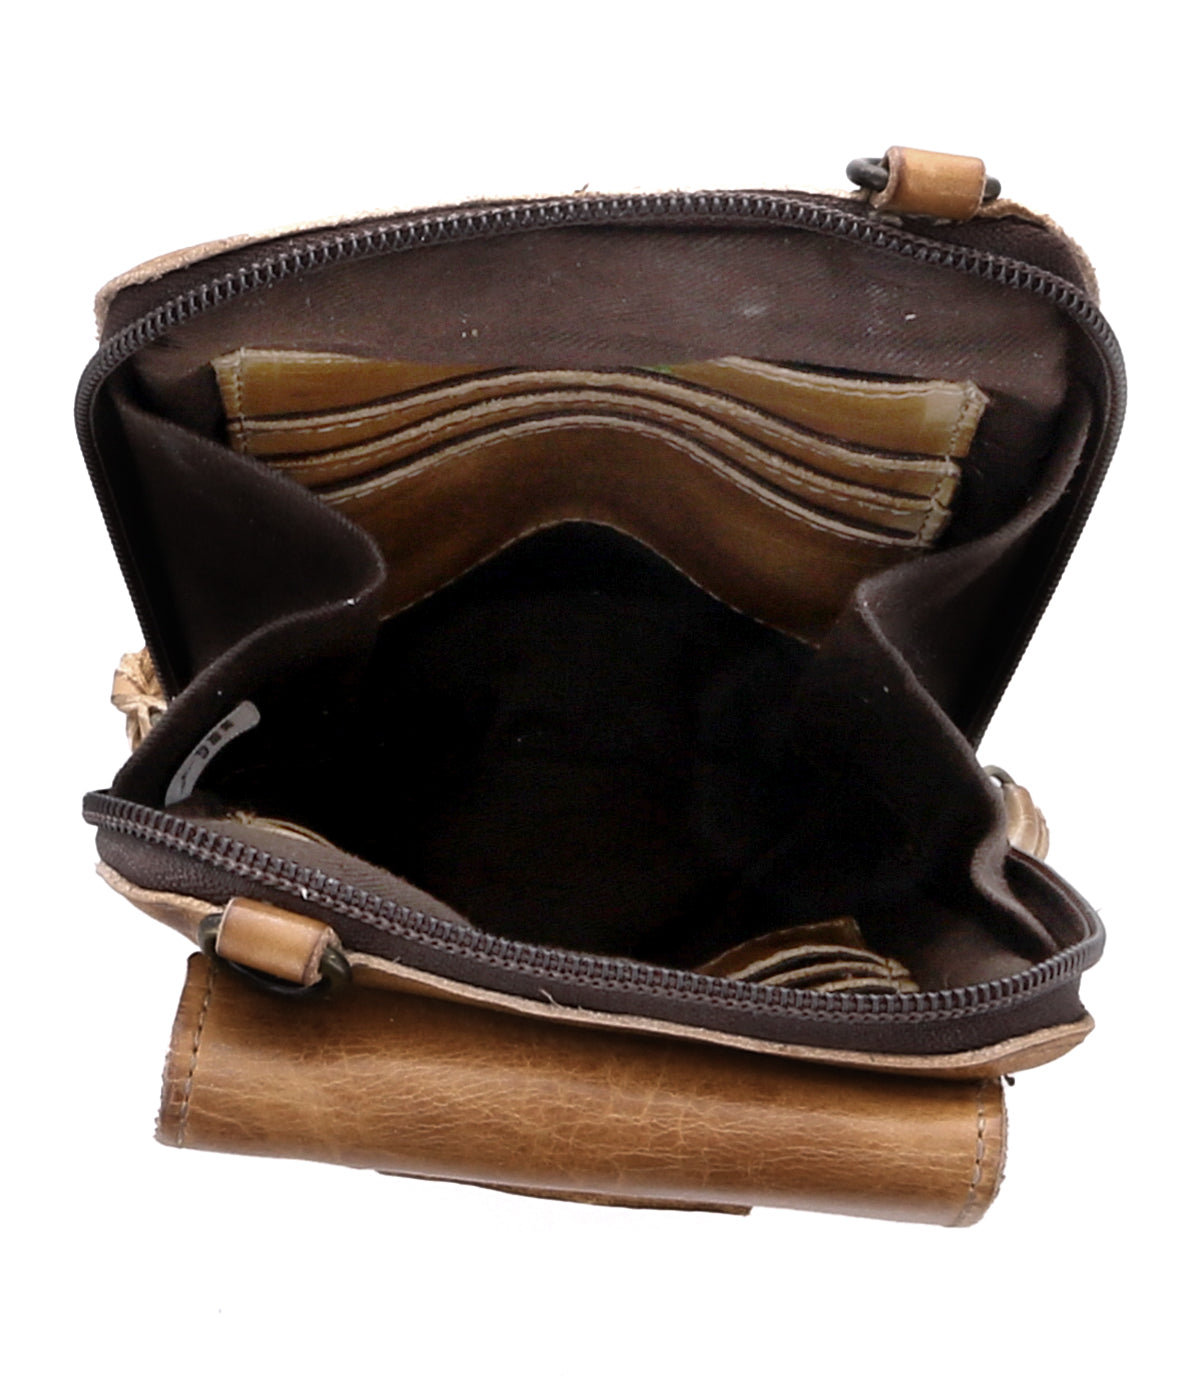 The premium leather interior of an Alelike brown leather purse by Bed Stu.